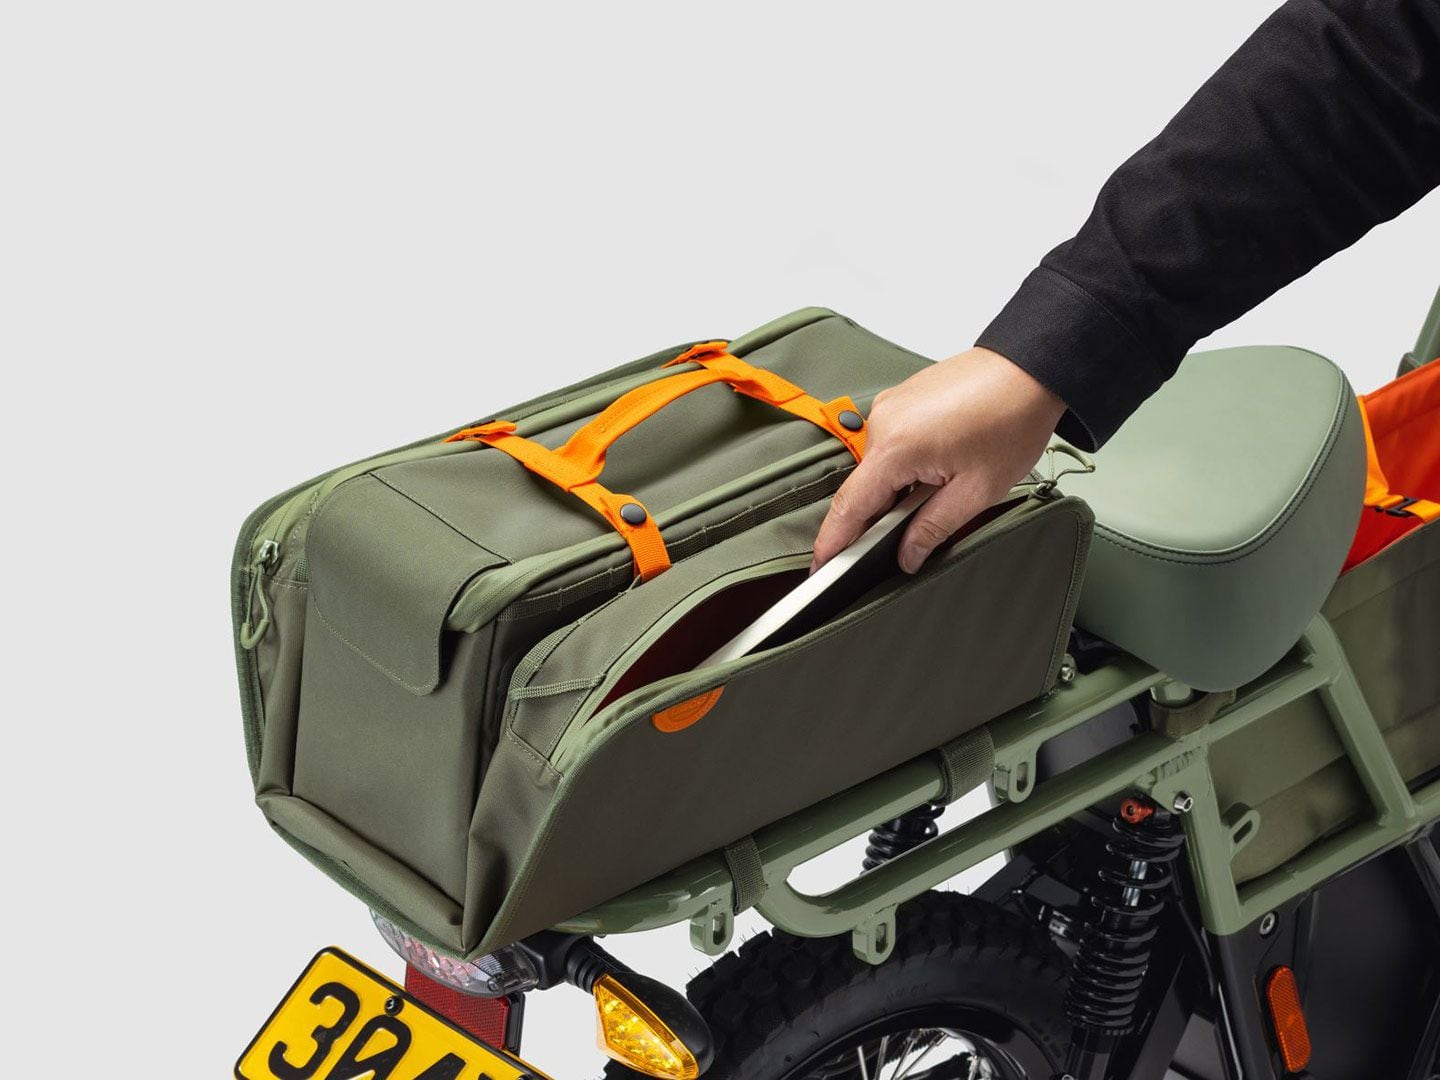 Waterproof tail bag doubles as a removable tote.